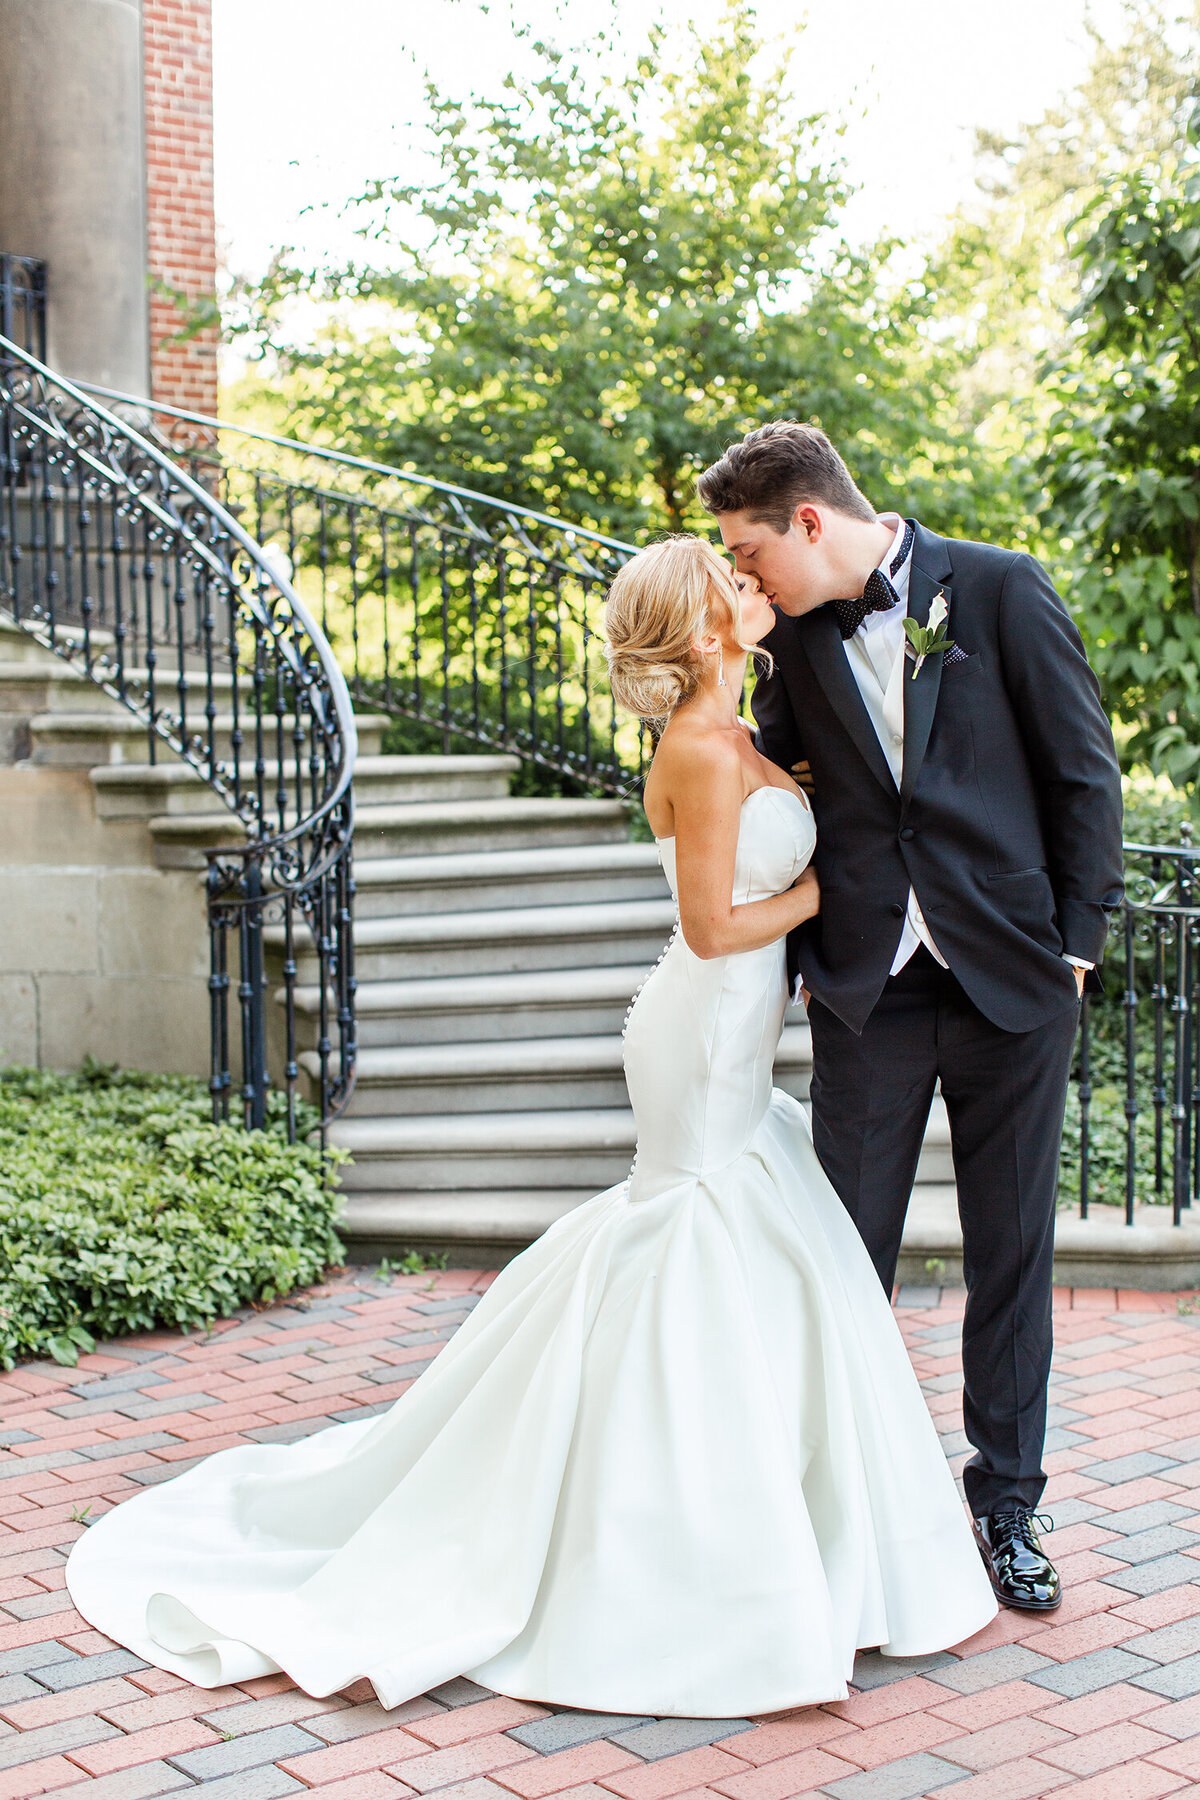 Bride and groom sharing a kiss in front of a grand staircase